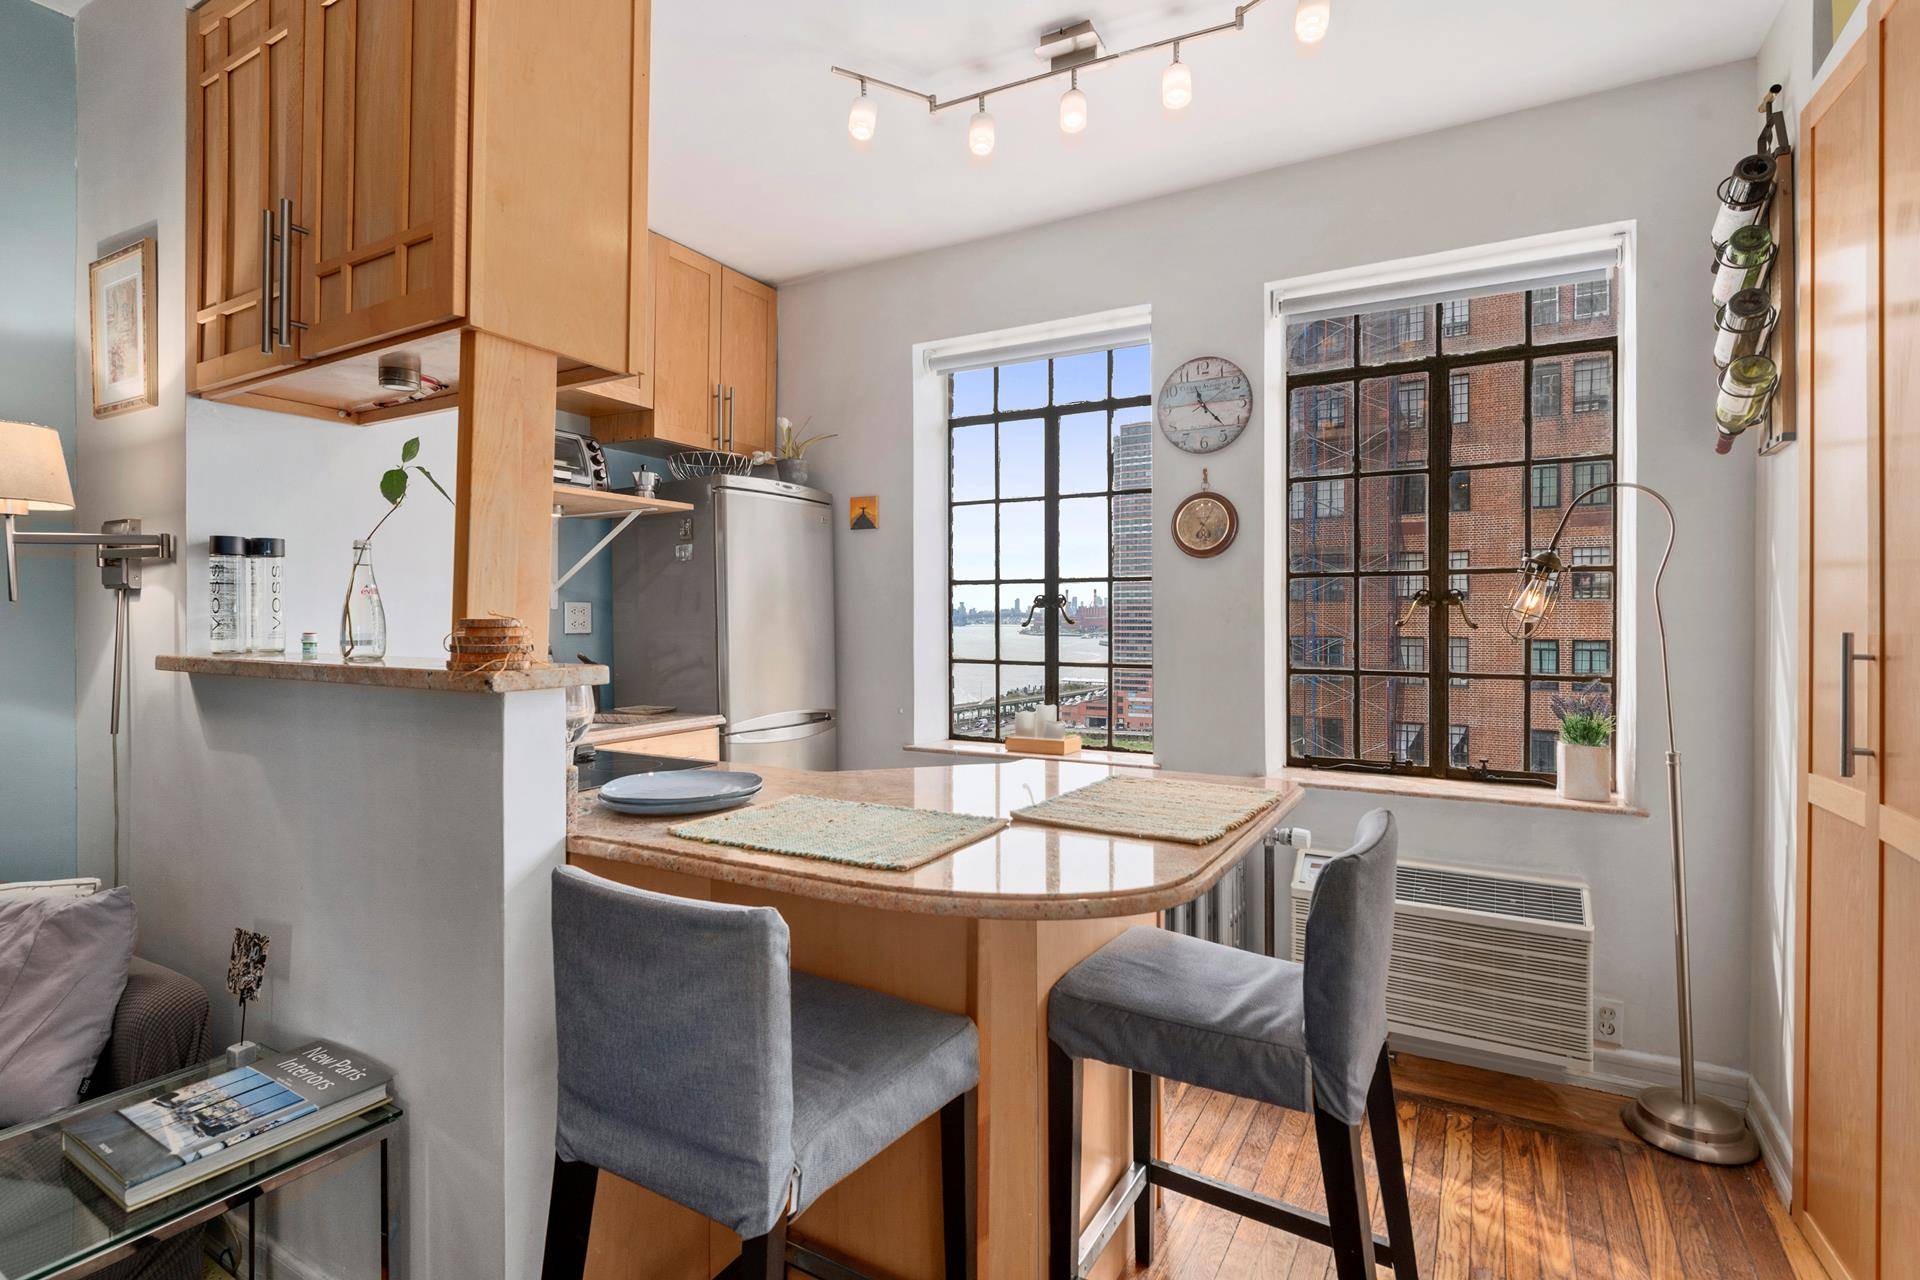 Residence 1020 is elegant, modern, and upgraded apartment with spectacular views of East River, Manhattan skyline and lush green park with beautiful landscape in front of the building.